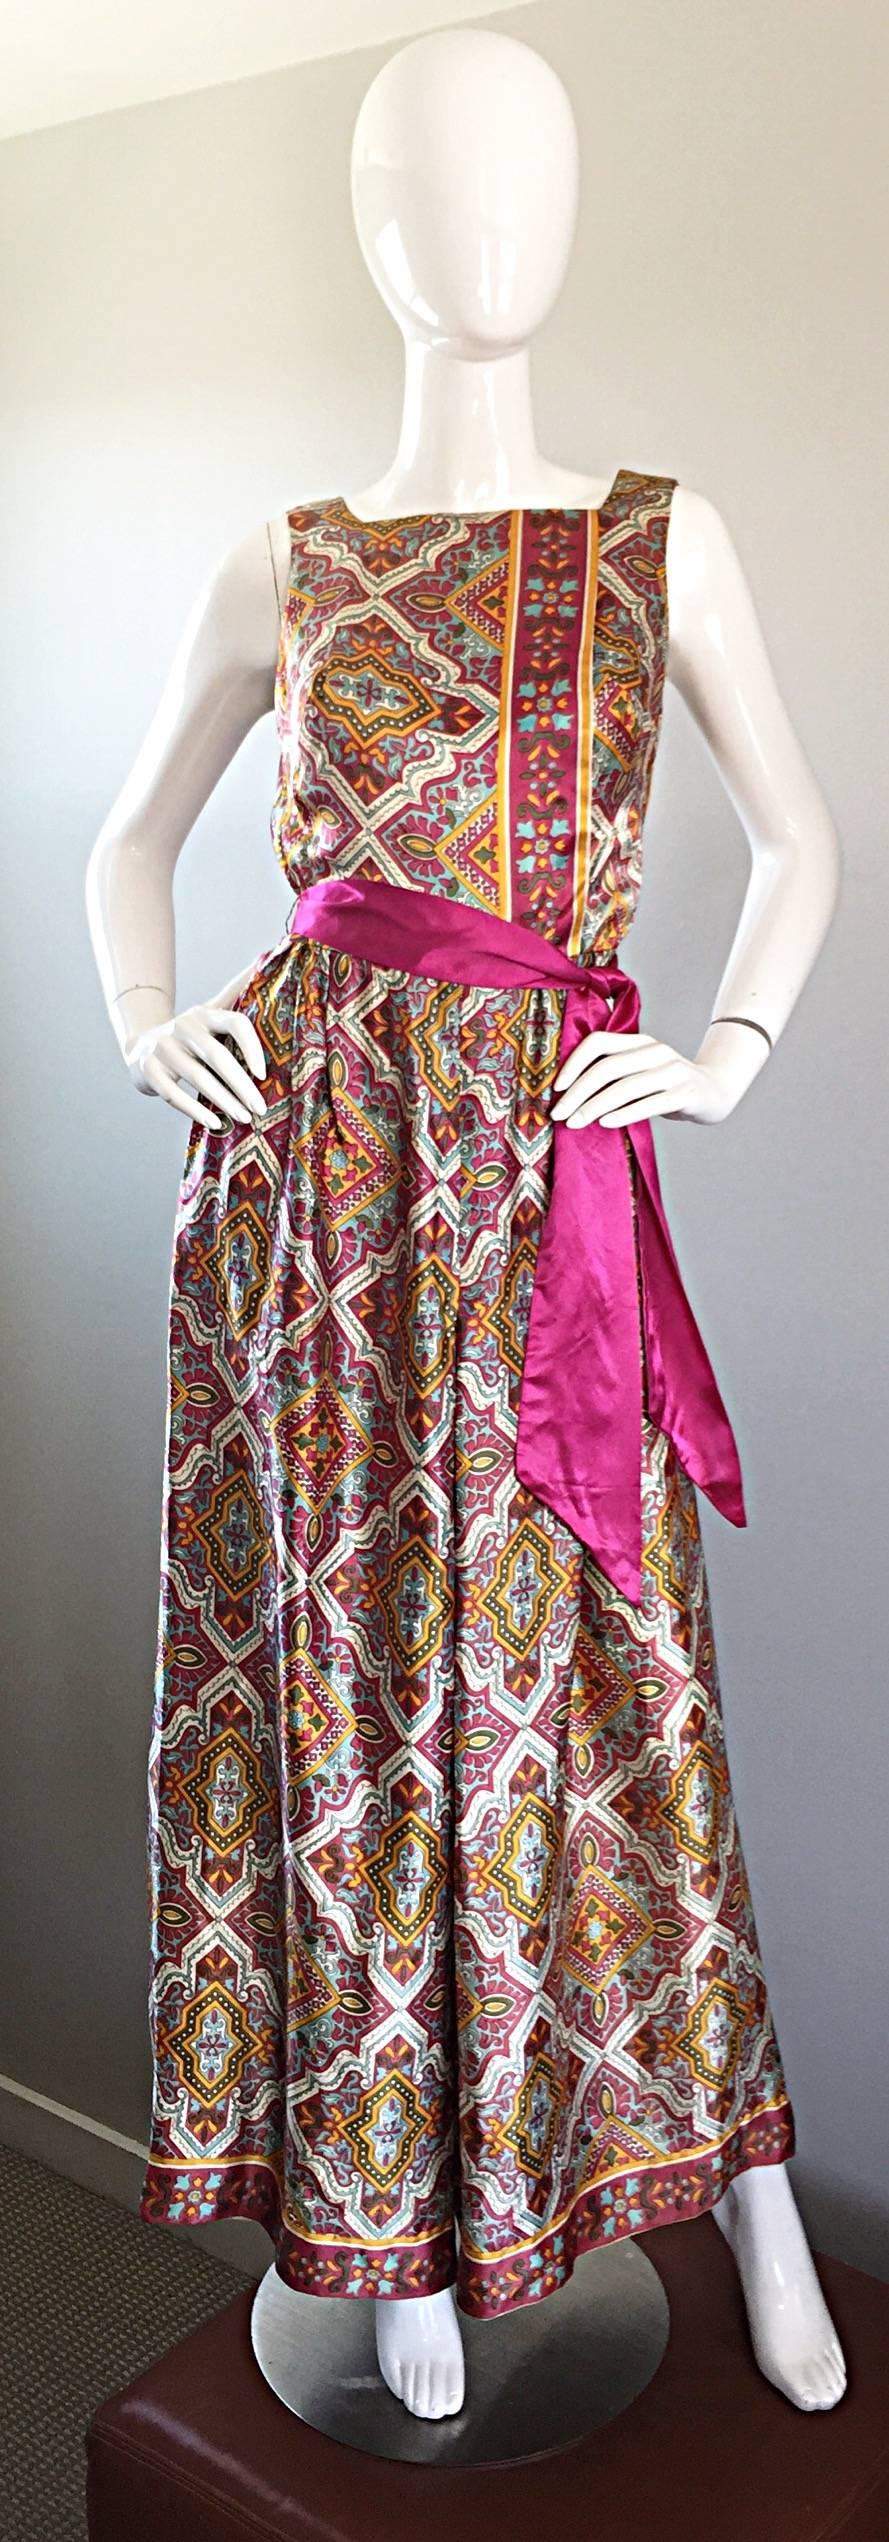 Incredible 1970s vintage ROBERTA LYNN silk jumpsuit! Features an all-over regal paisley/ethnic print throughout. Roberta Lynn was a well-known designer in the 1960s and 1970s. She was based in Hollywood, and dressed many of the top starlets at the